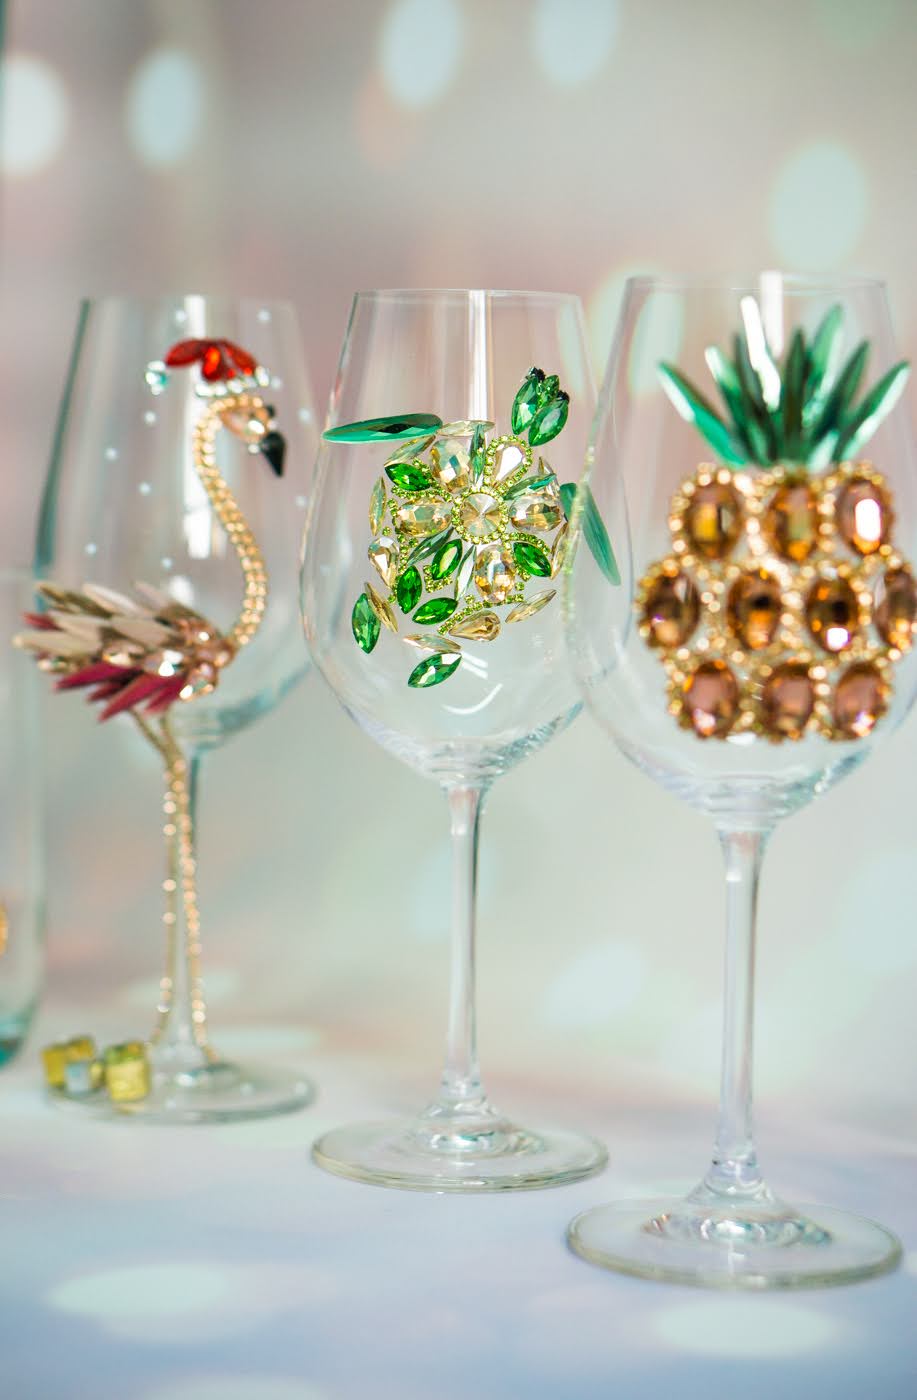 Tropical-themed wine glass with a dazzling rose gold pineapple, symbolizing warmth and hospitality